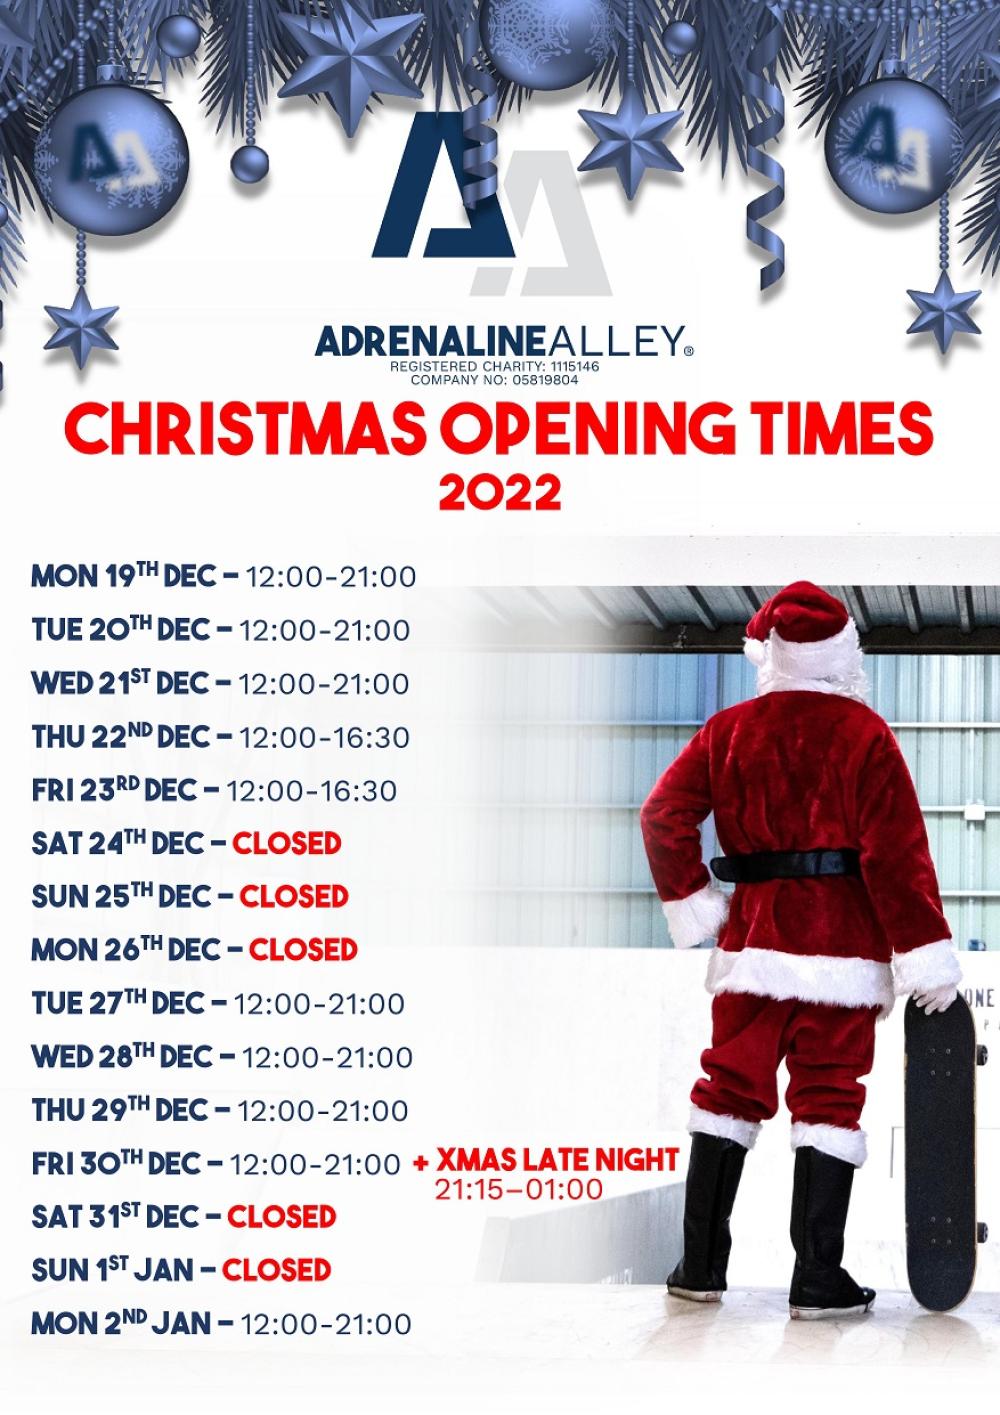 CHRISTMAS OPENING TIMES 2022